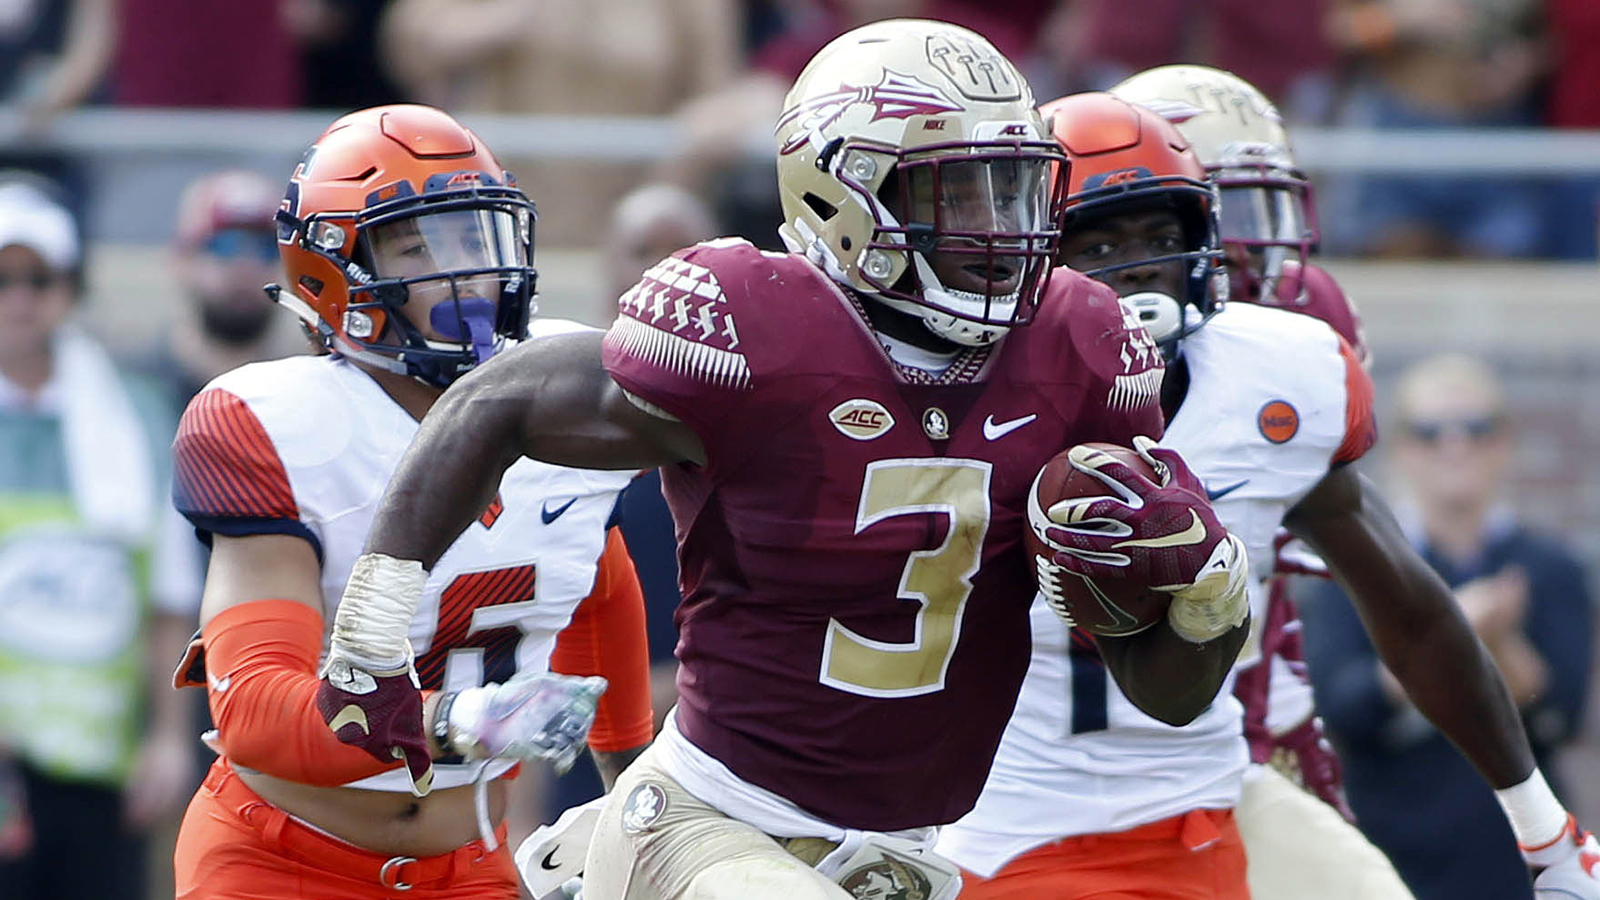 FSU survives Syracuse's late drive to pick up 1st home win of season